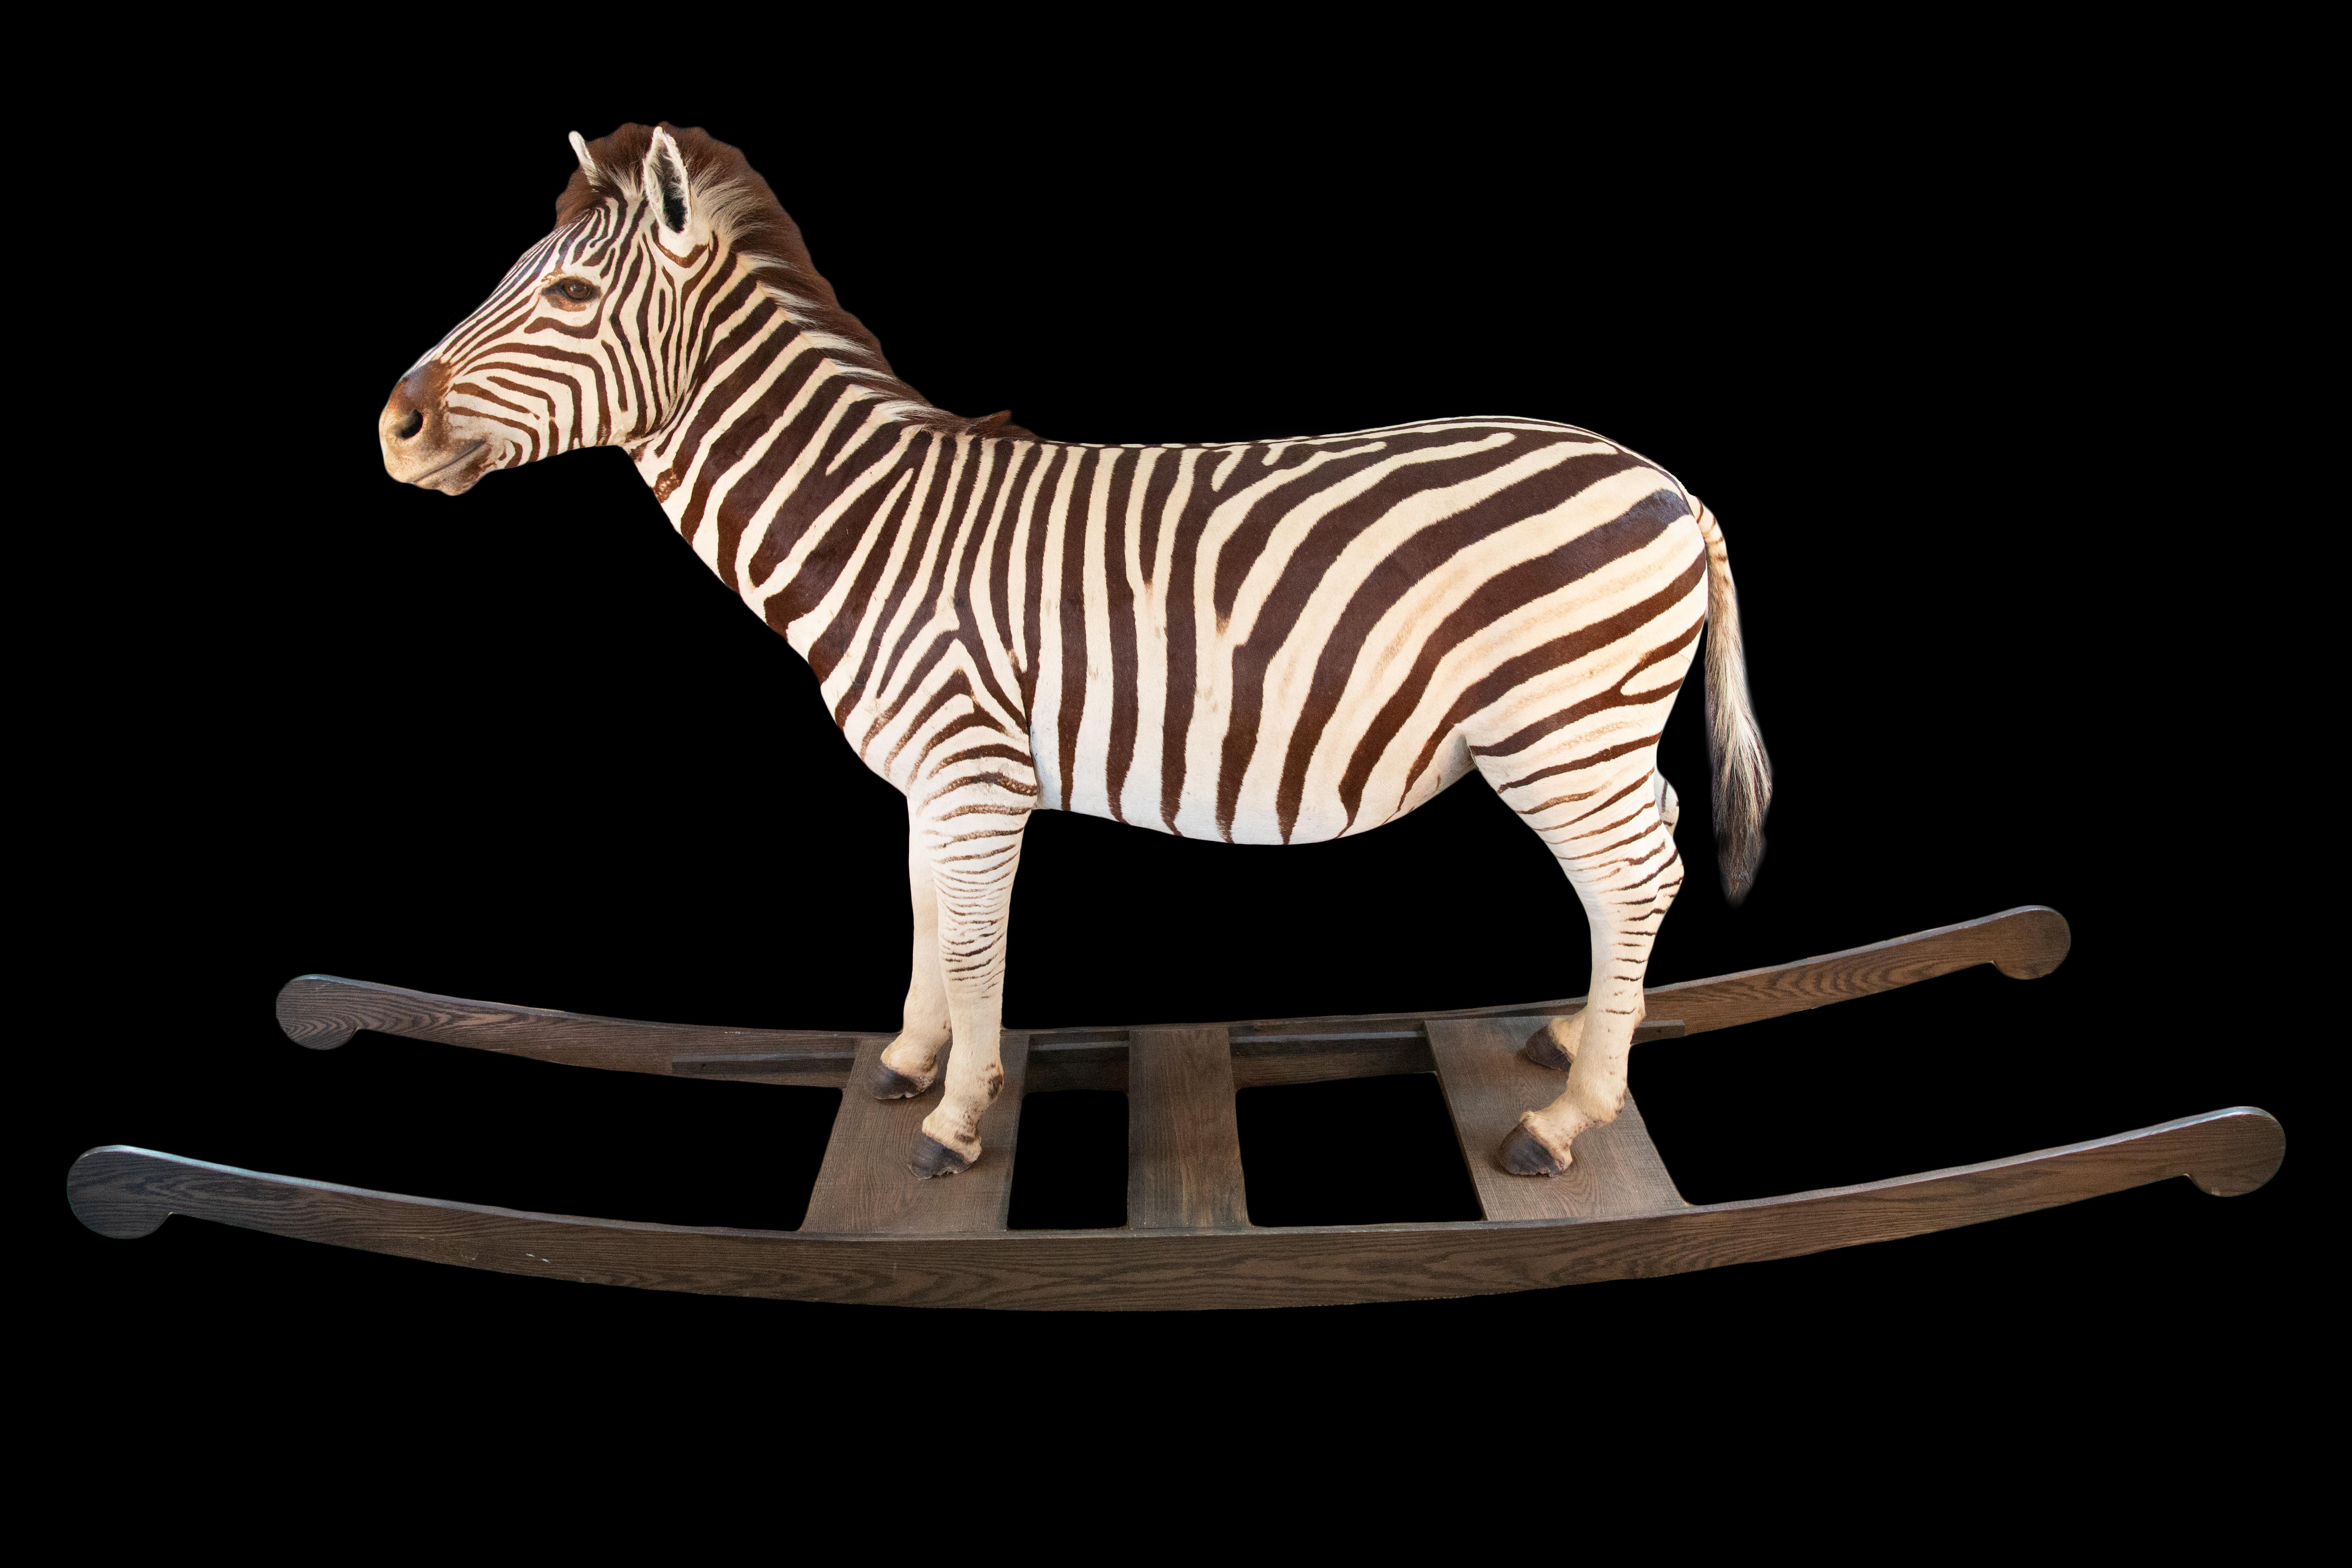 This extraordinary and unique item is a full-sized taxidermy zebra expertly mounted as a rocking zebra, akin to its distant cousin, the classic rocking horse. With its realistic and striking appearance, it is sure to be a focal point in any room or